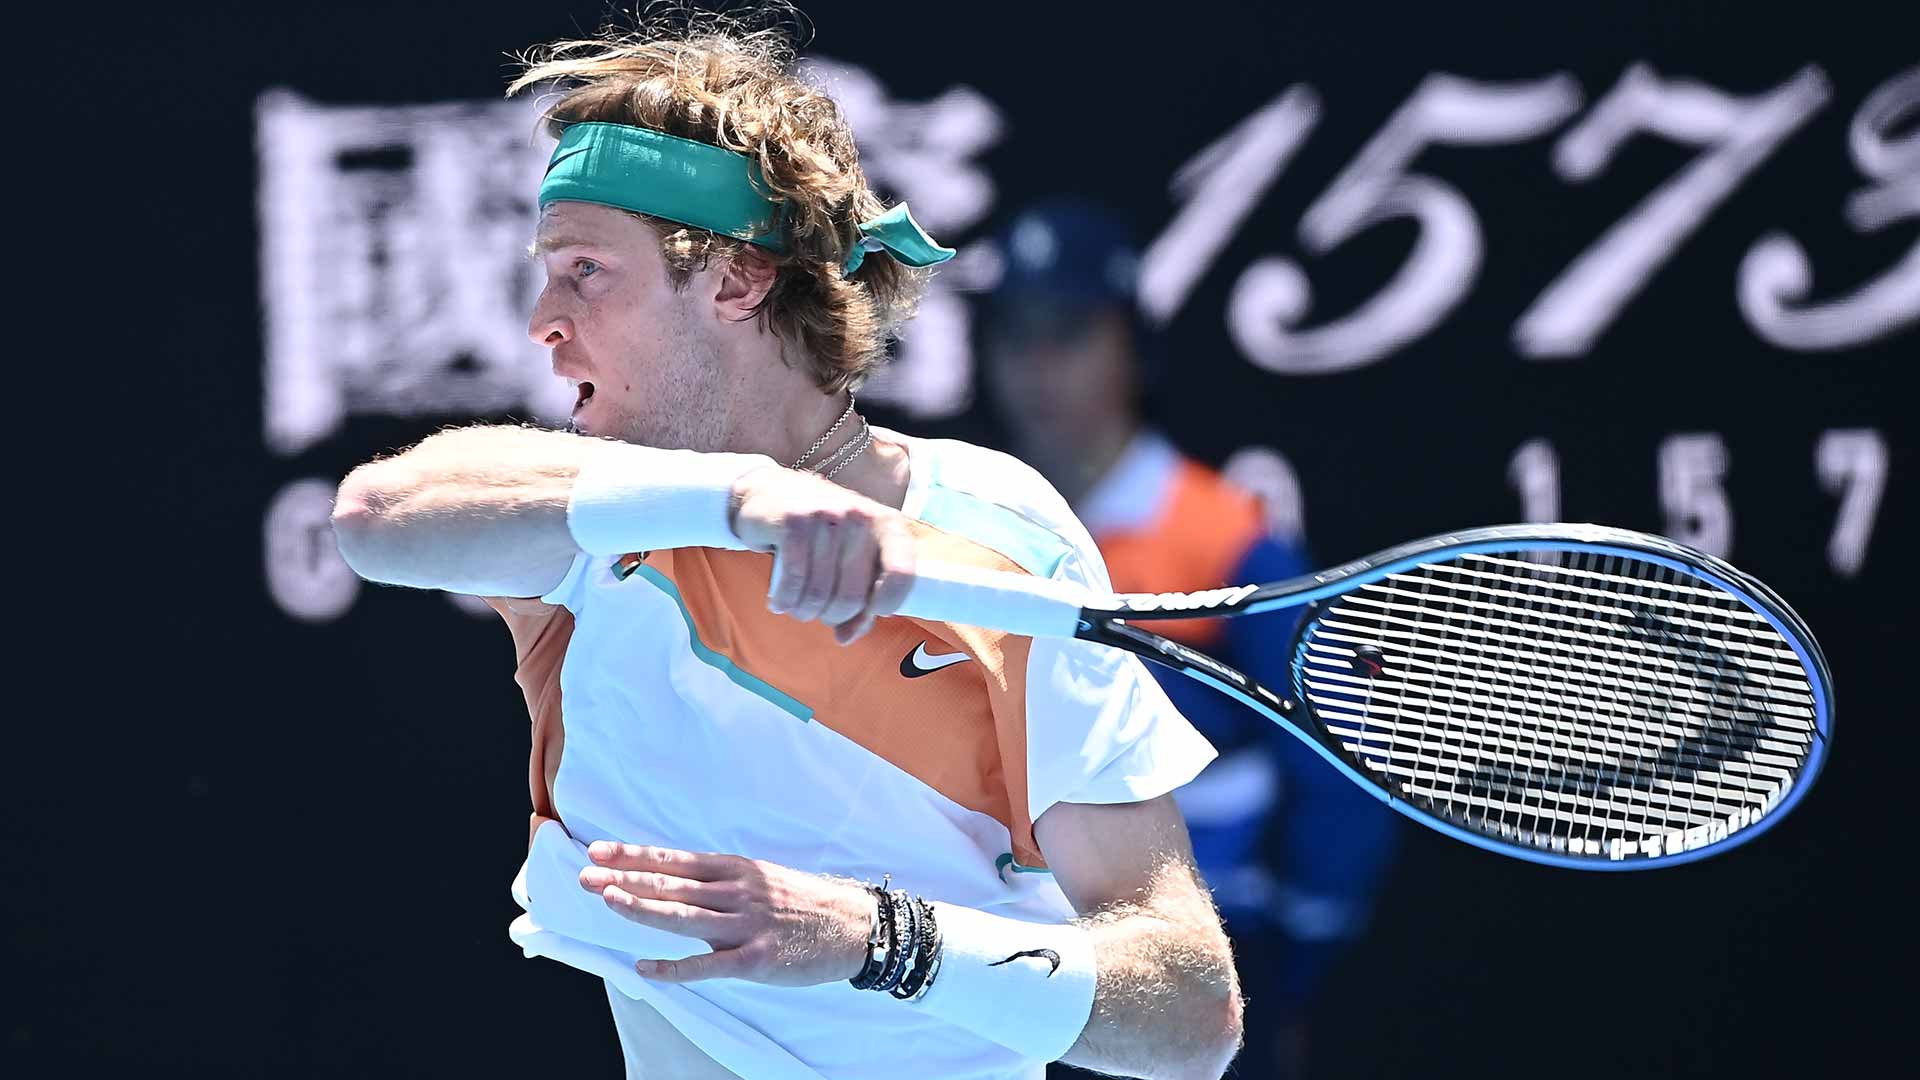 Andrey Rublev makes quick work of his opening match at the Australian Open.